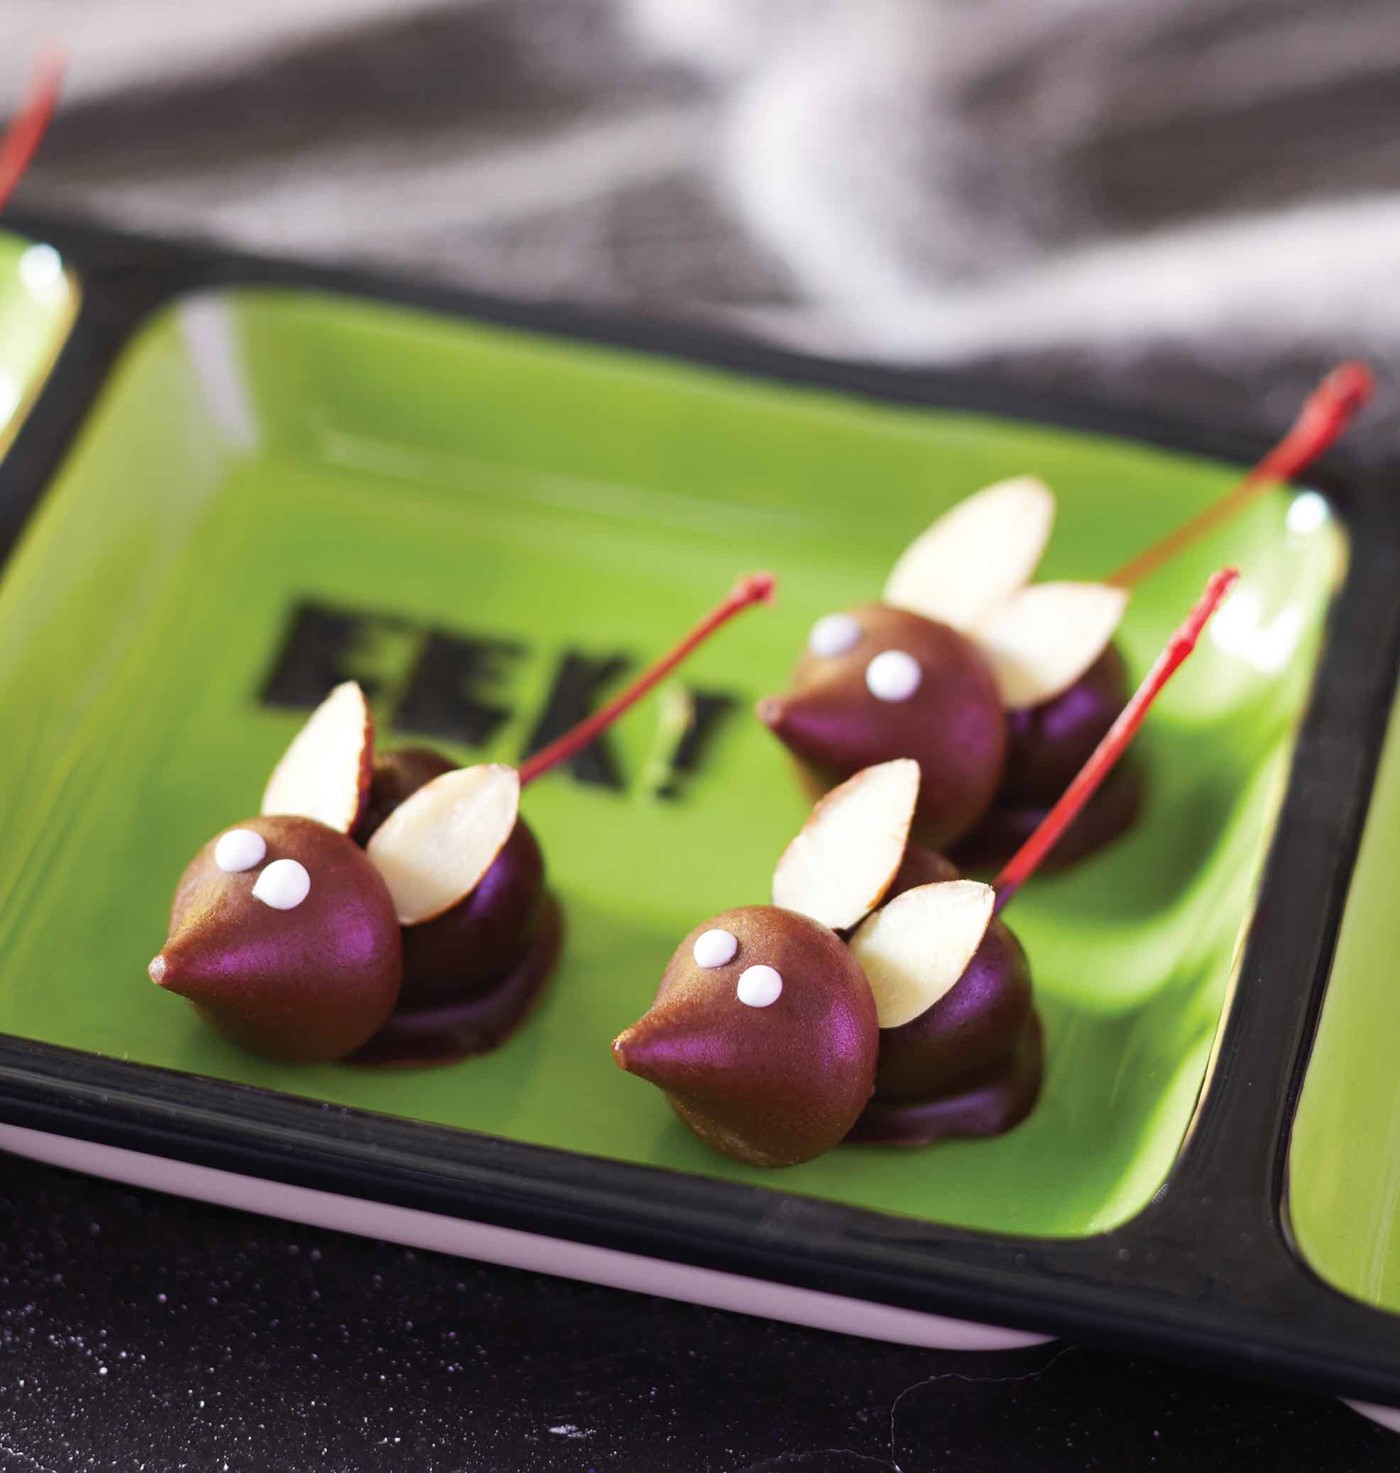 Chocolate Covered Cherries Bodies, Hershey Kiss Faces and Two Almond Slices Make Creepy Mice